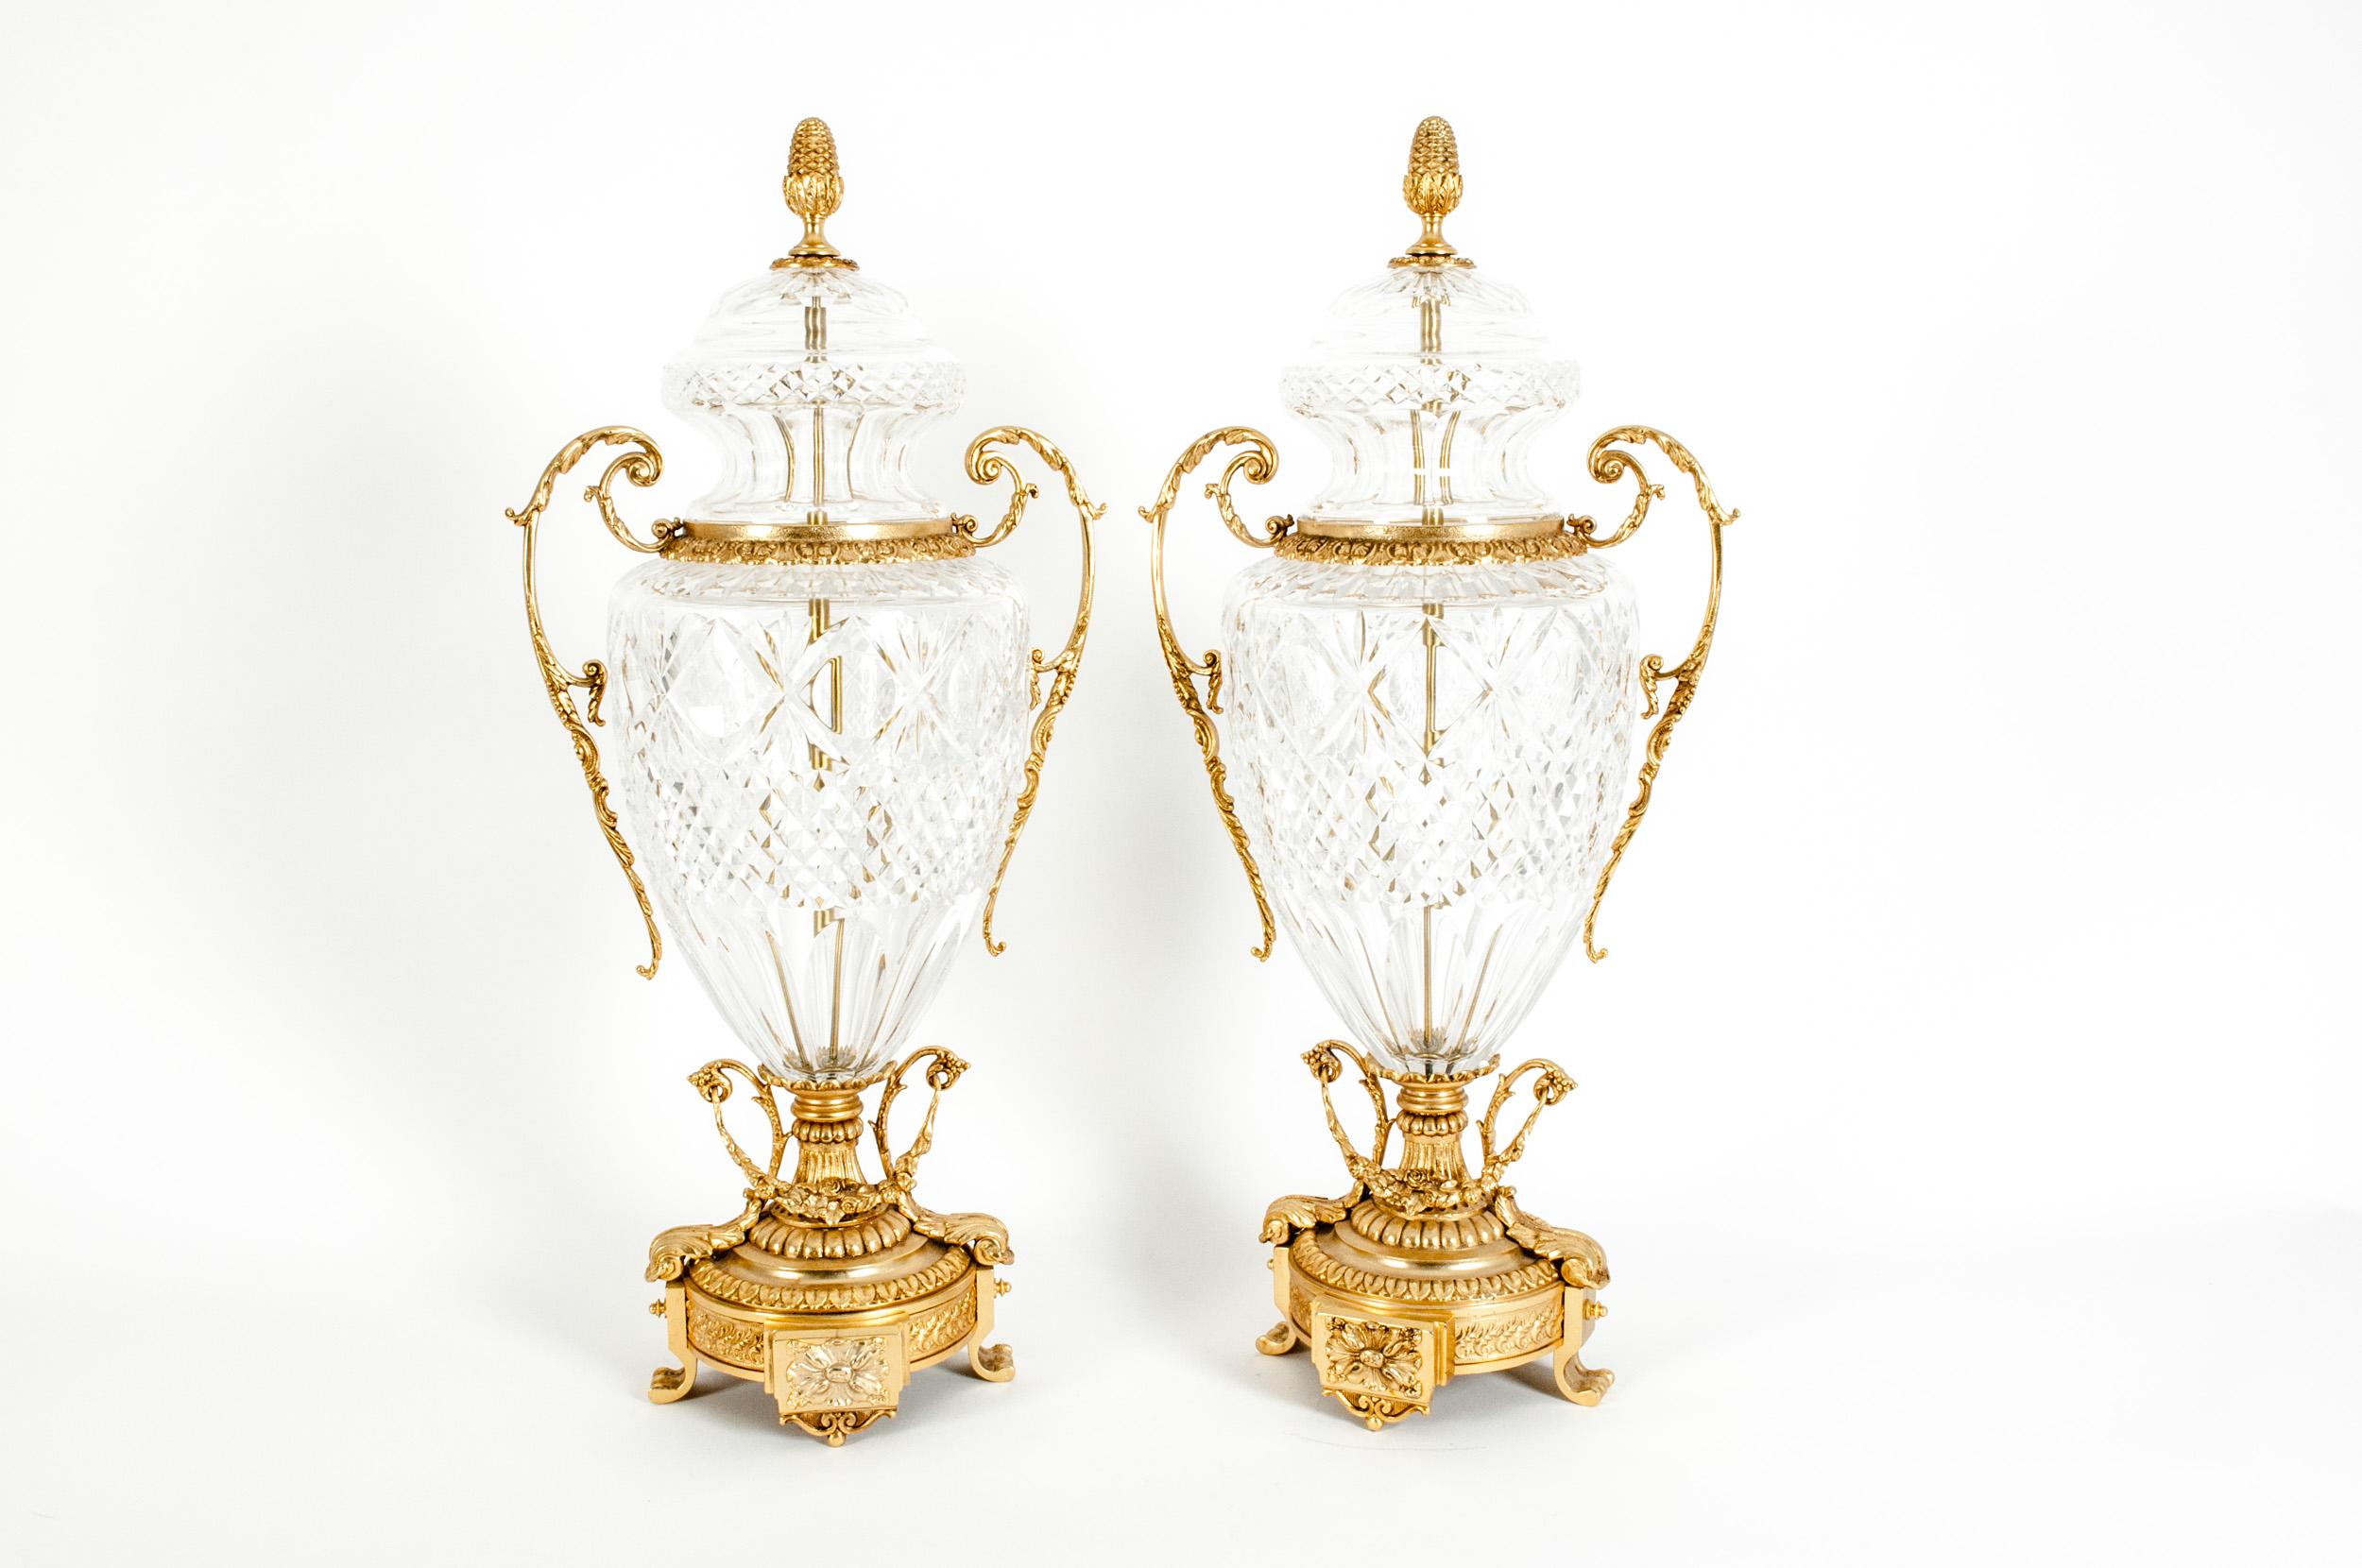 French Impressive Pair of Footed Gilt Bronze-Mounted / Cut Crystal Urns